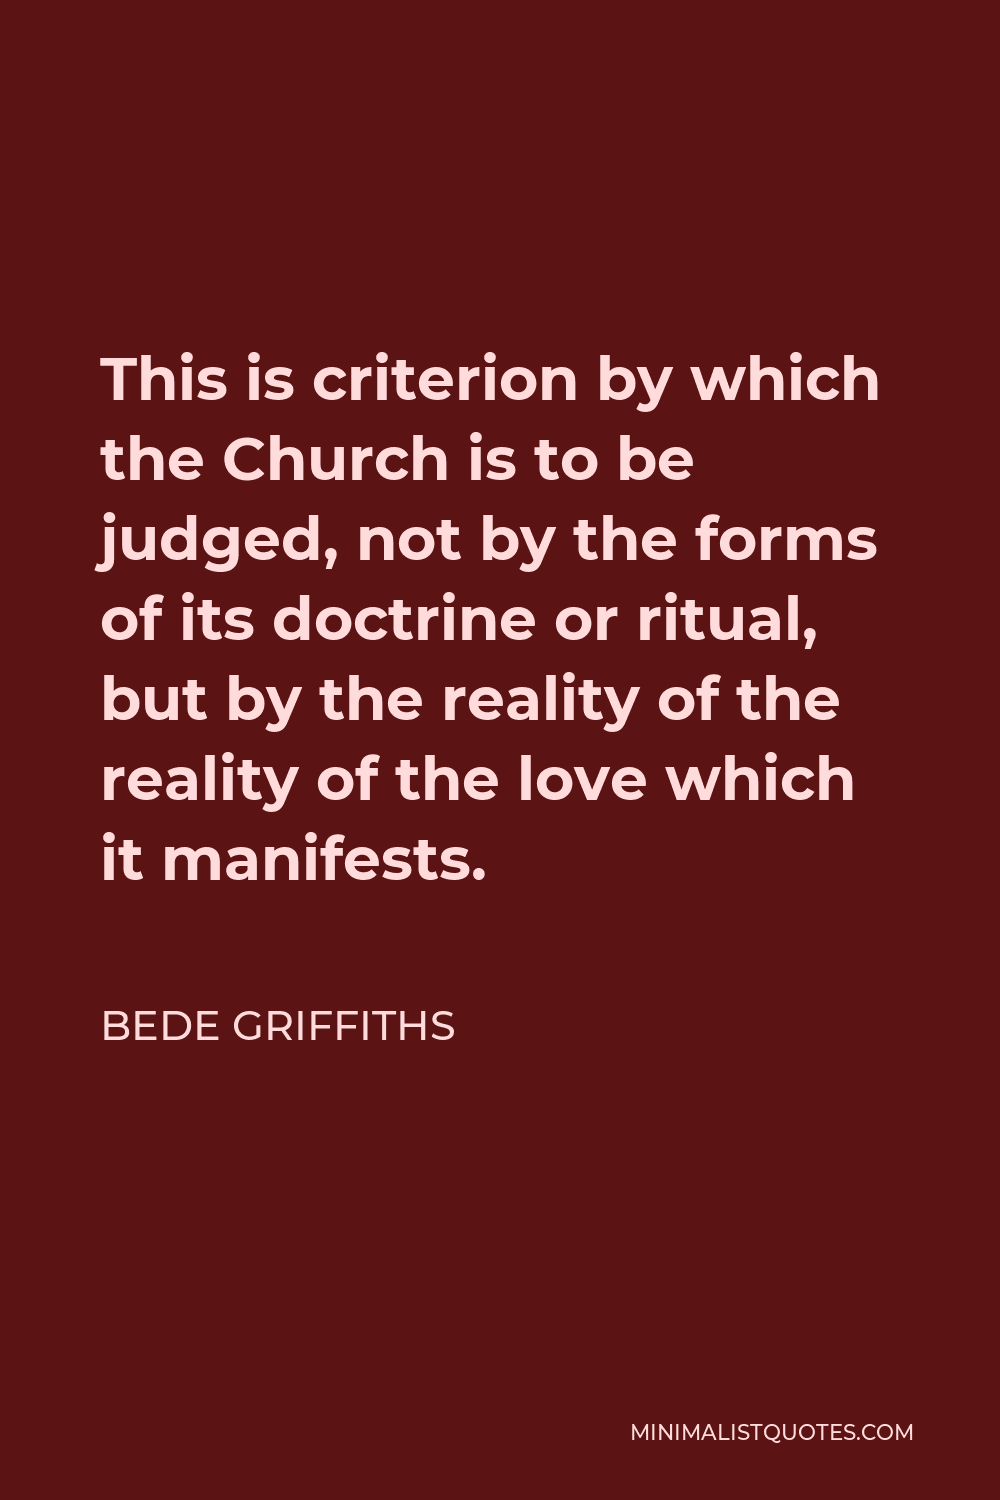 Bede Griffiths Quote - This is criterion by which the Church is to be judged, not by the forms of its doctrine or ritual, but by the reality of the reality of the love which it manifests.